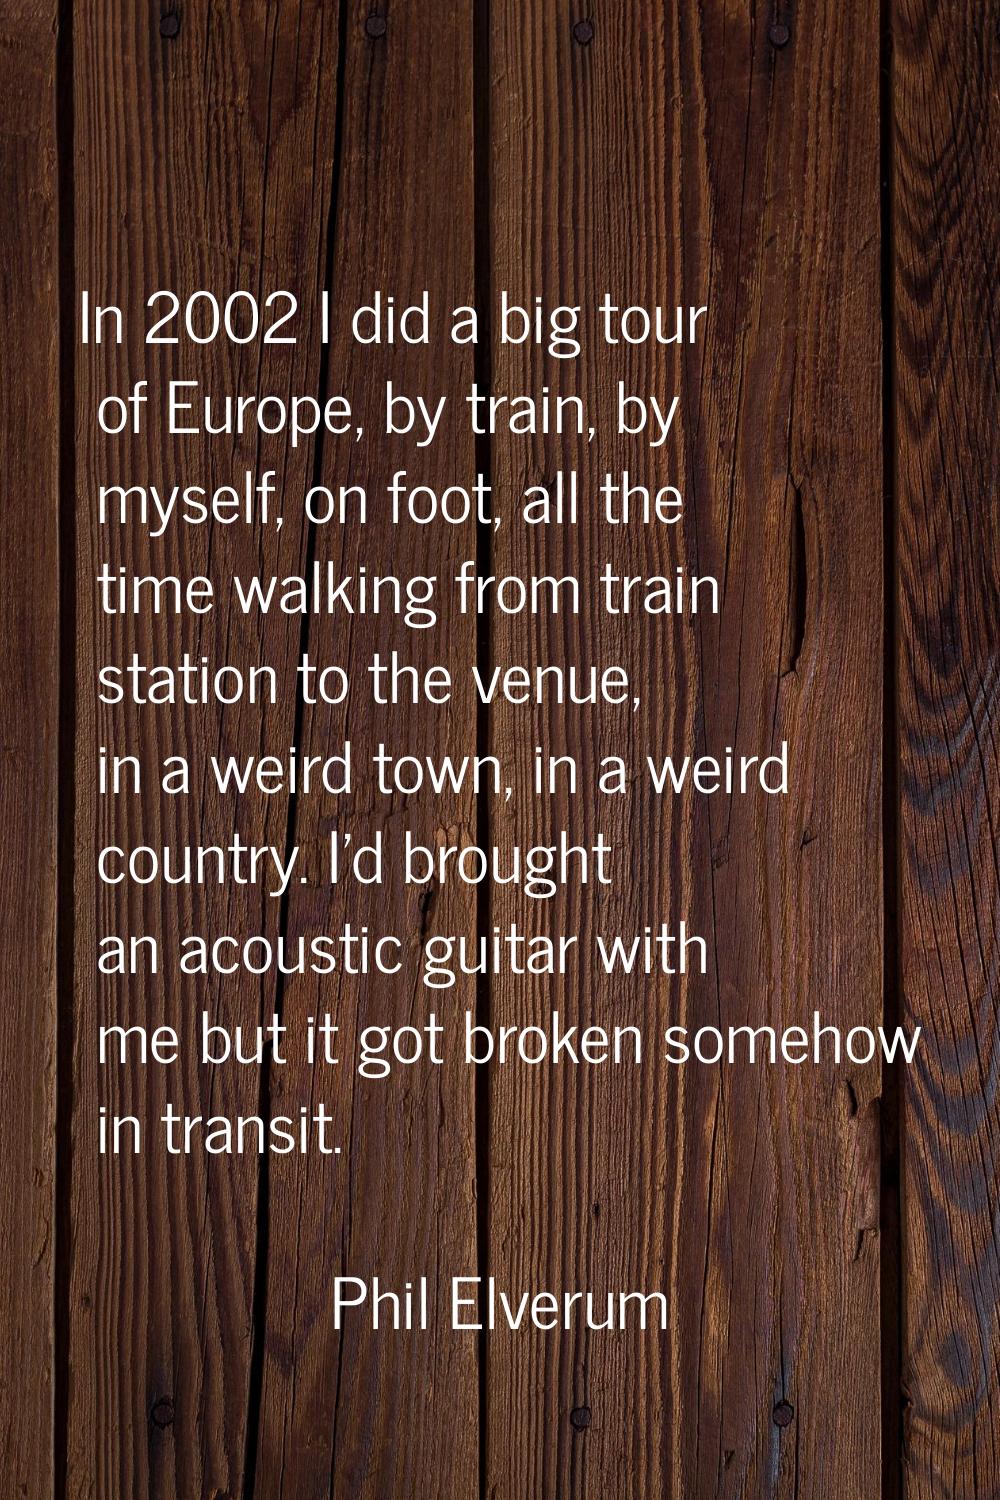 In 2002 I did a big tour of Europe, by train, by myself, on foot, all the time walking from train s